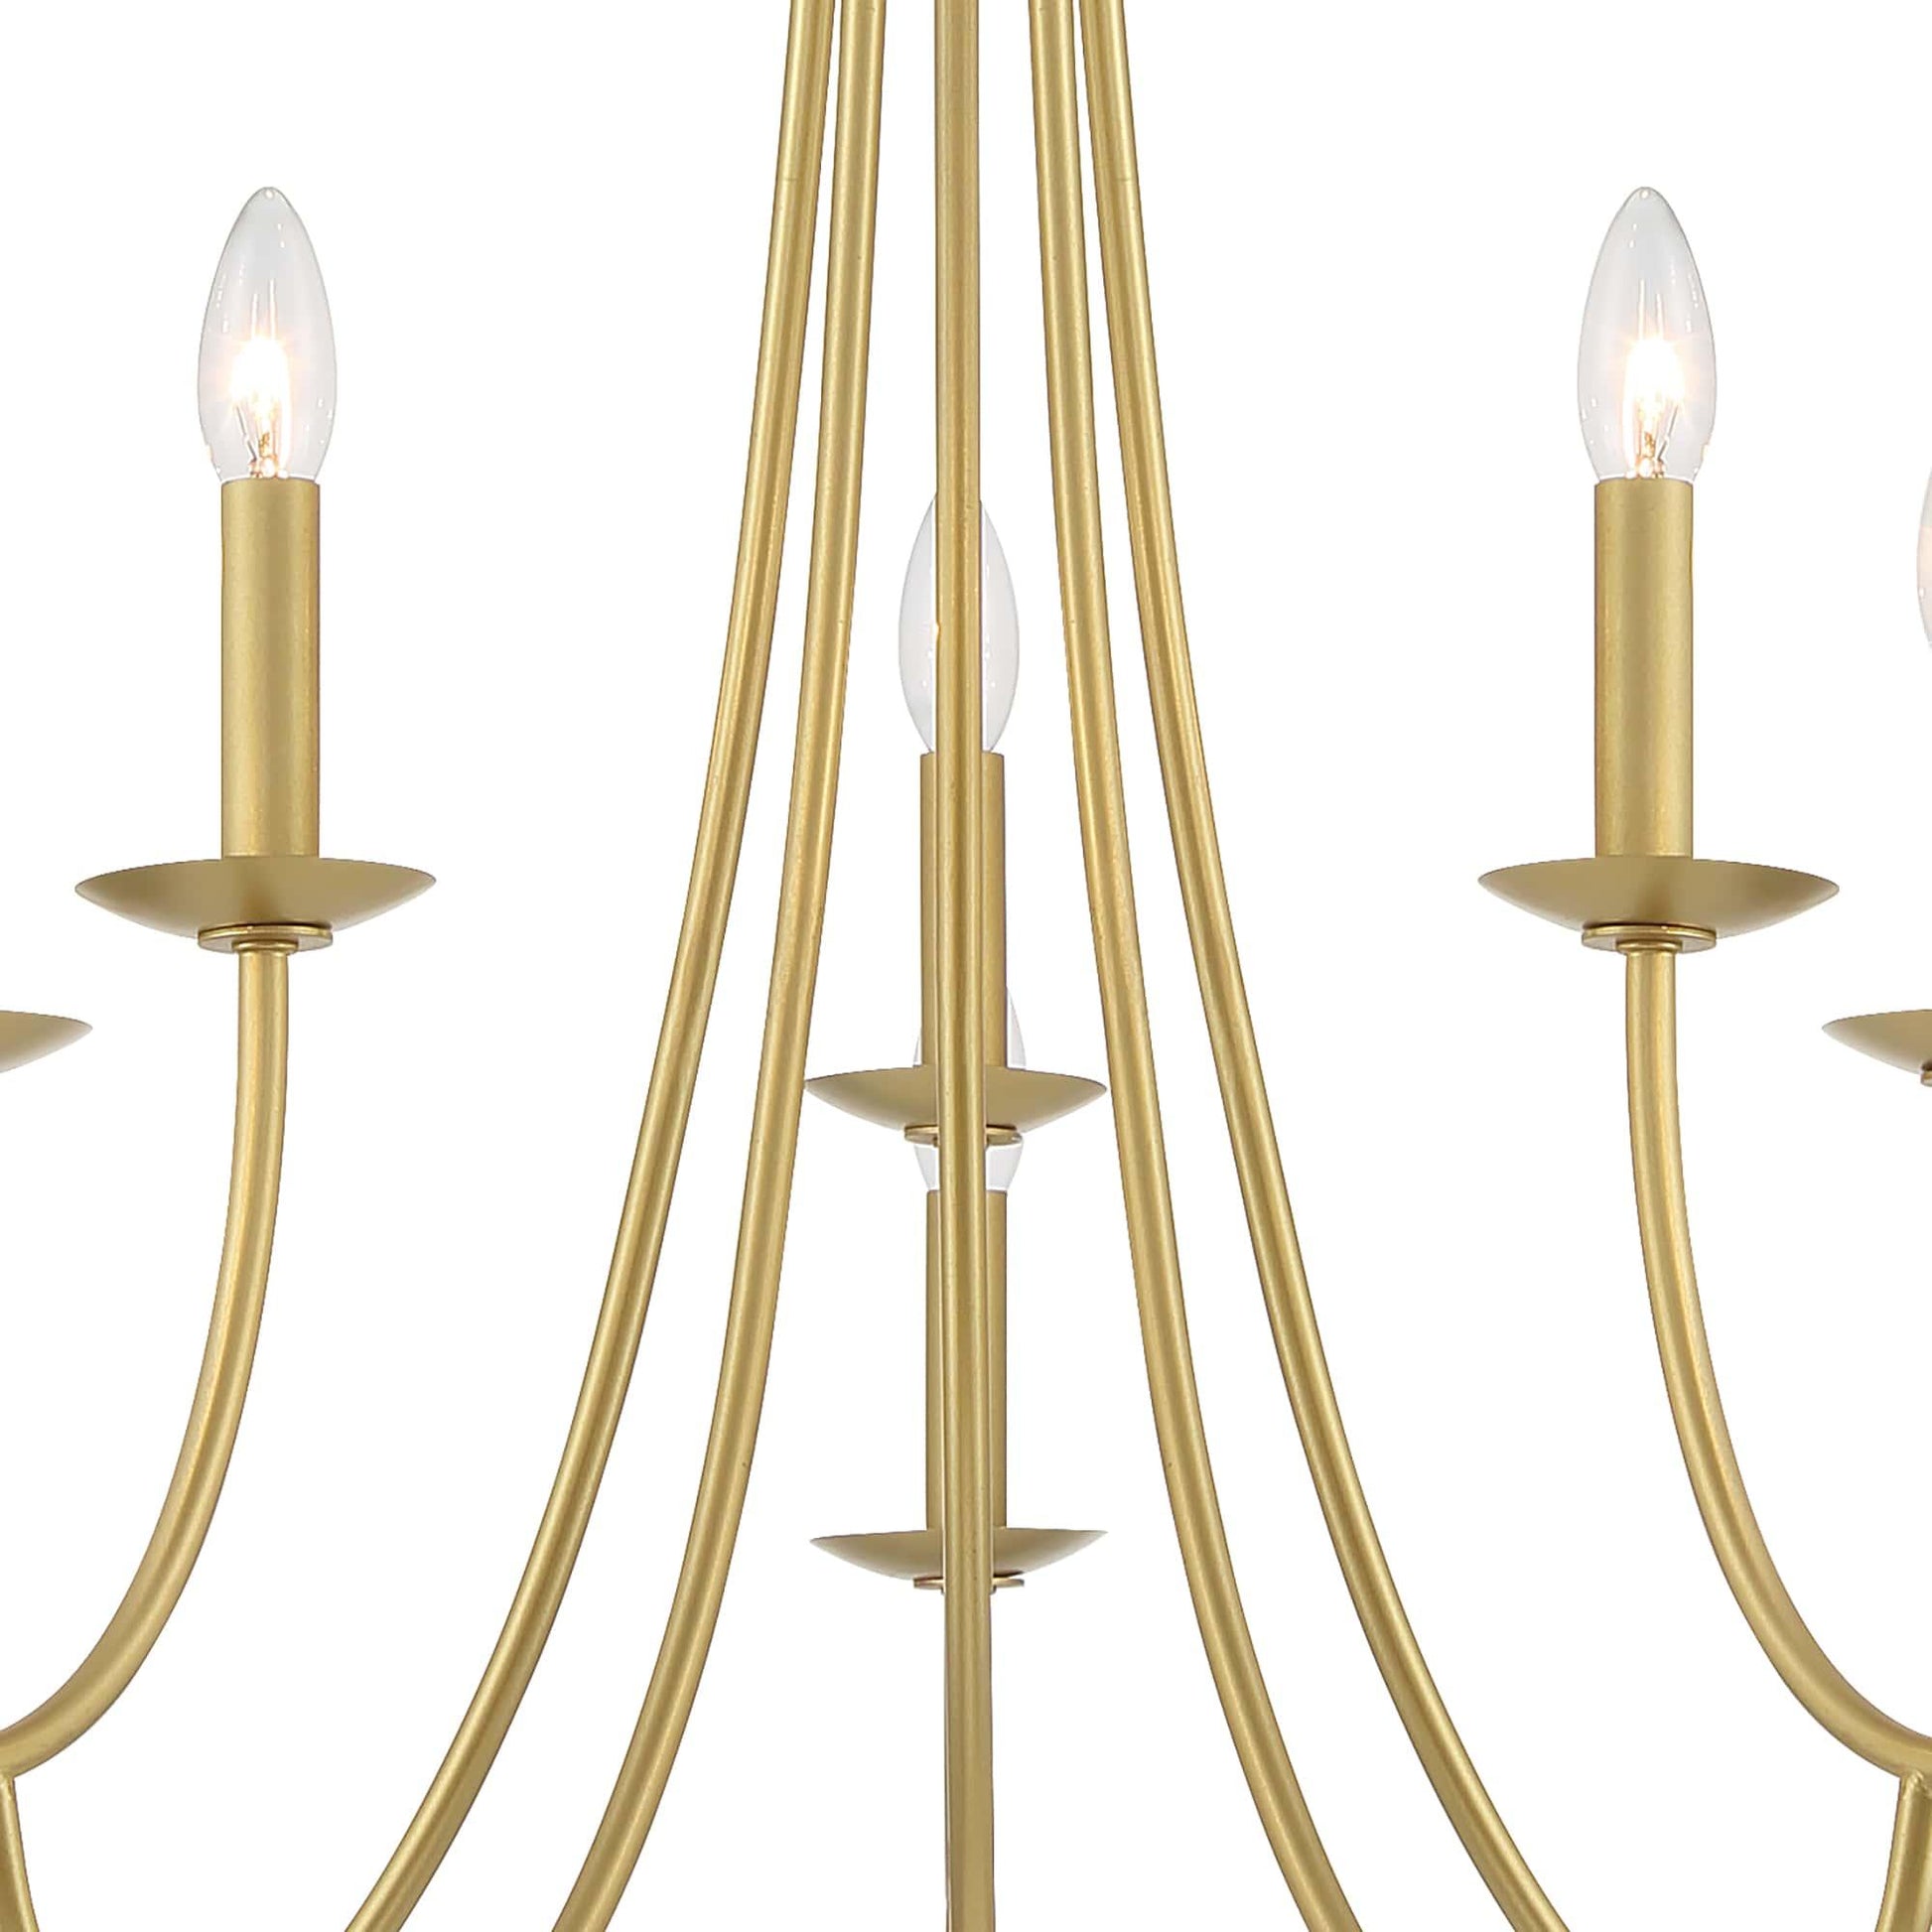 10 light candle style classic chandelier (5) by ACROMA